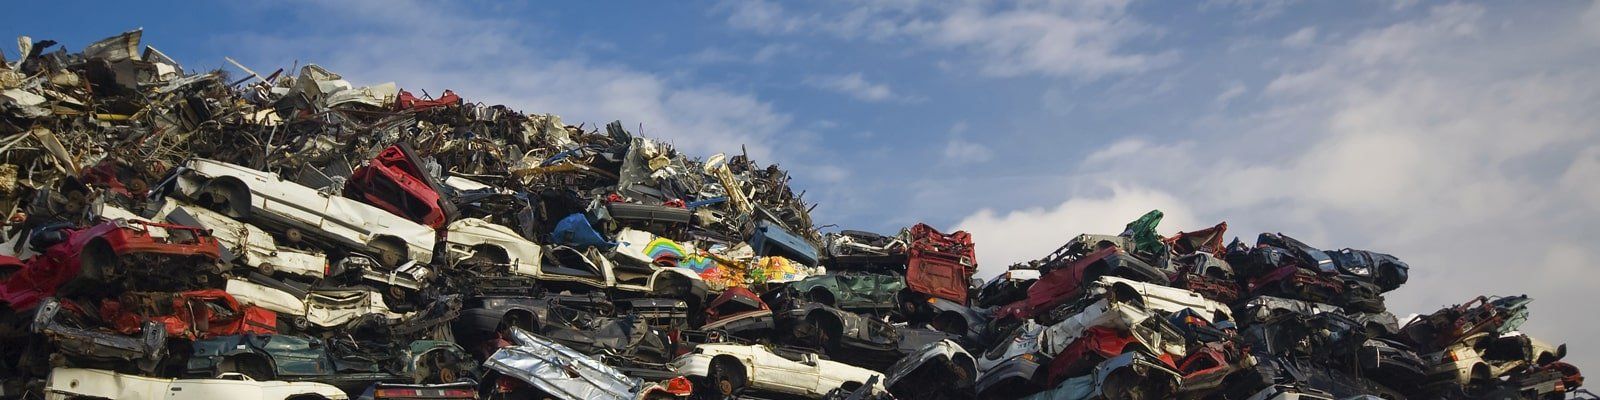 cash for car wrecker Sydney Get Top Dollars for Wrecked Cars – Who is the best in Sydney?